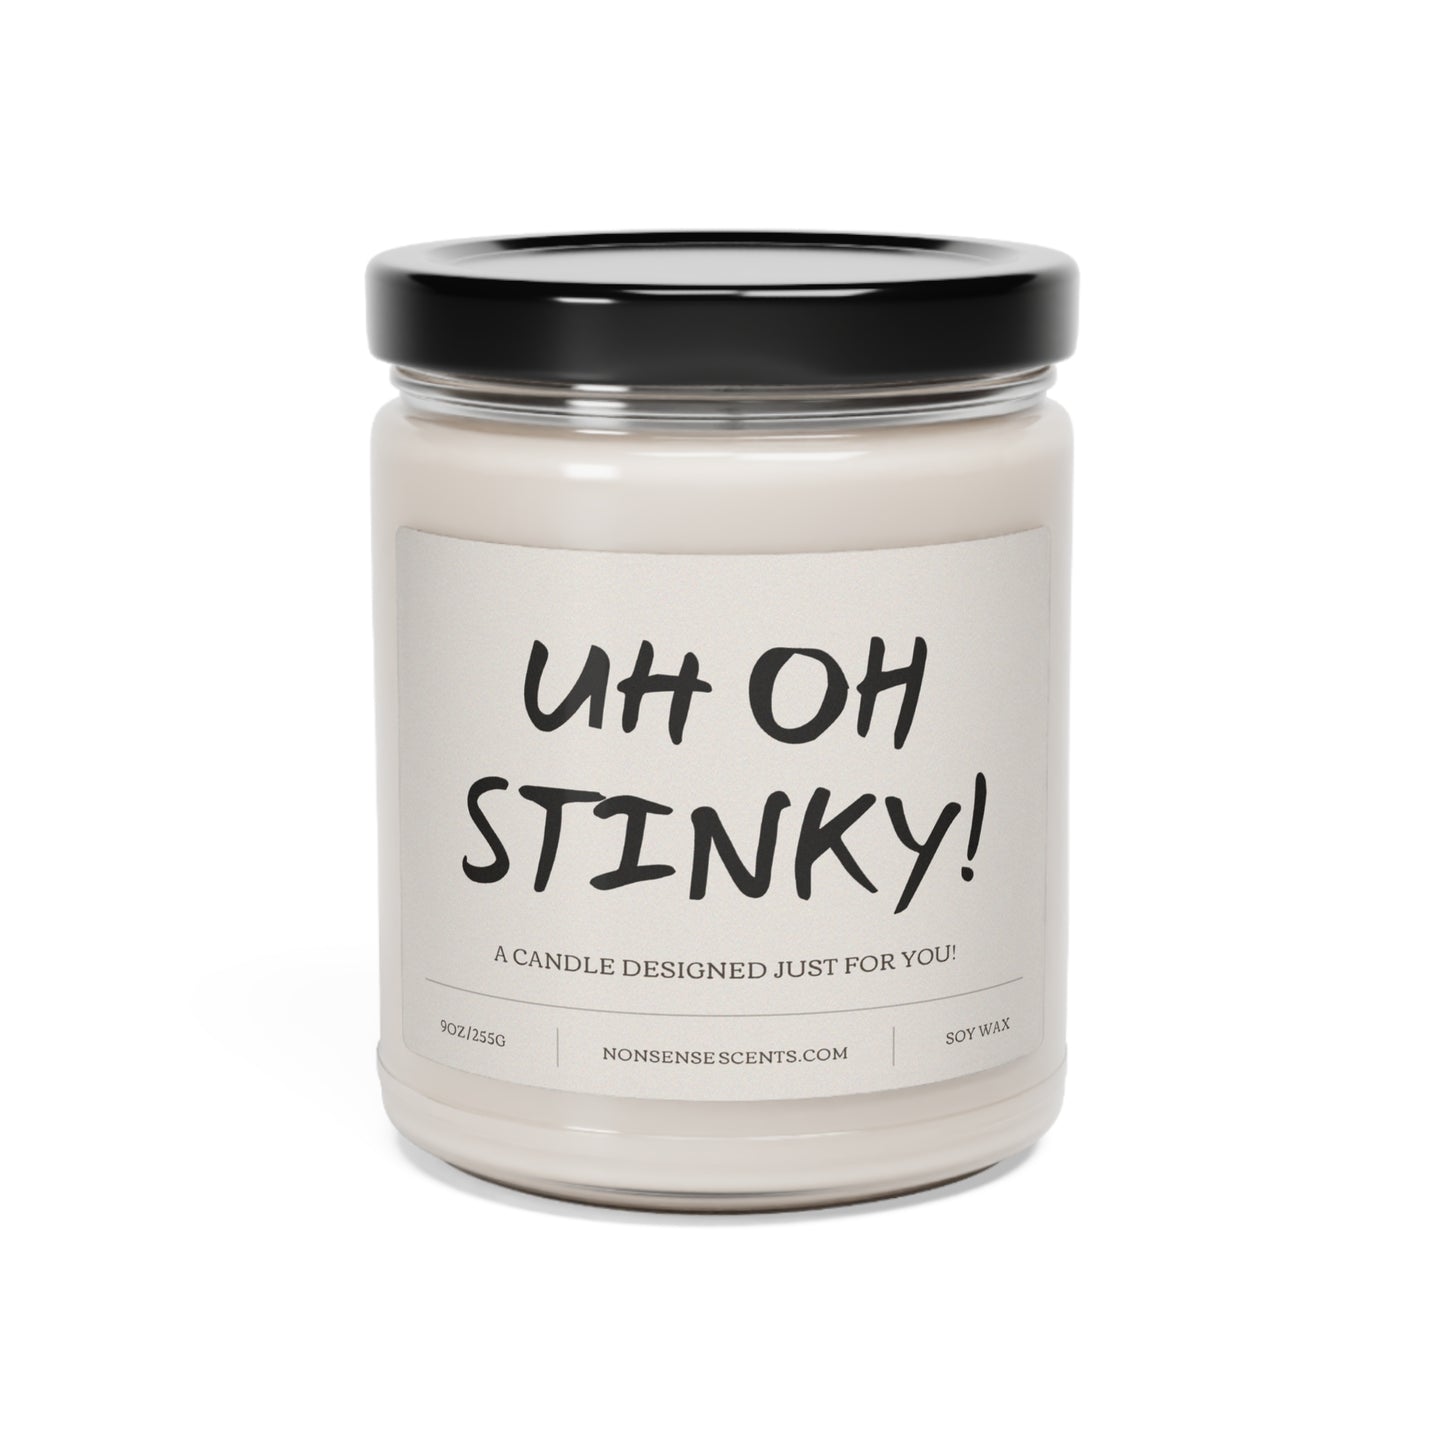 "Uh Oh, Stinky" Scented Candle